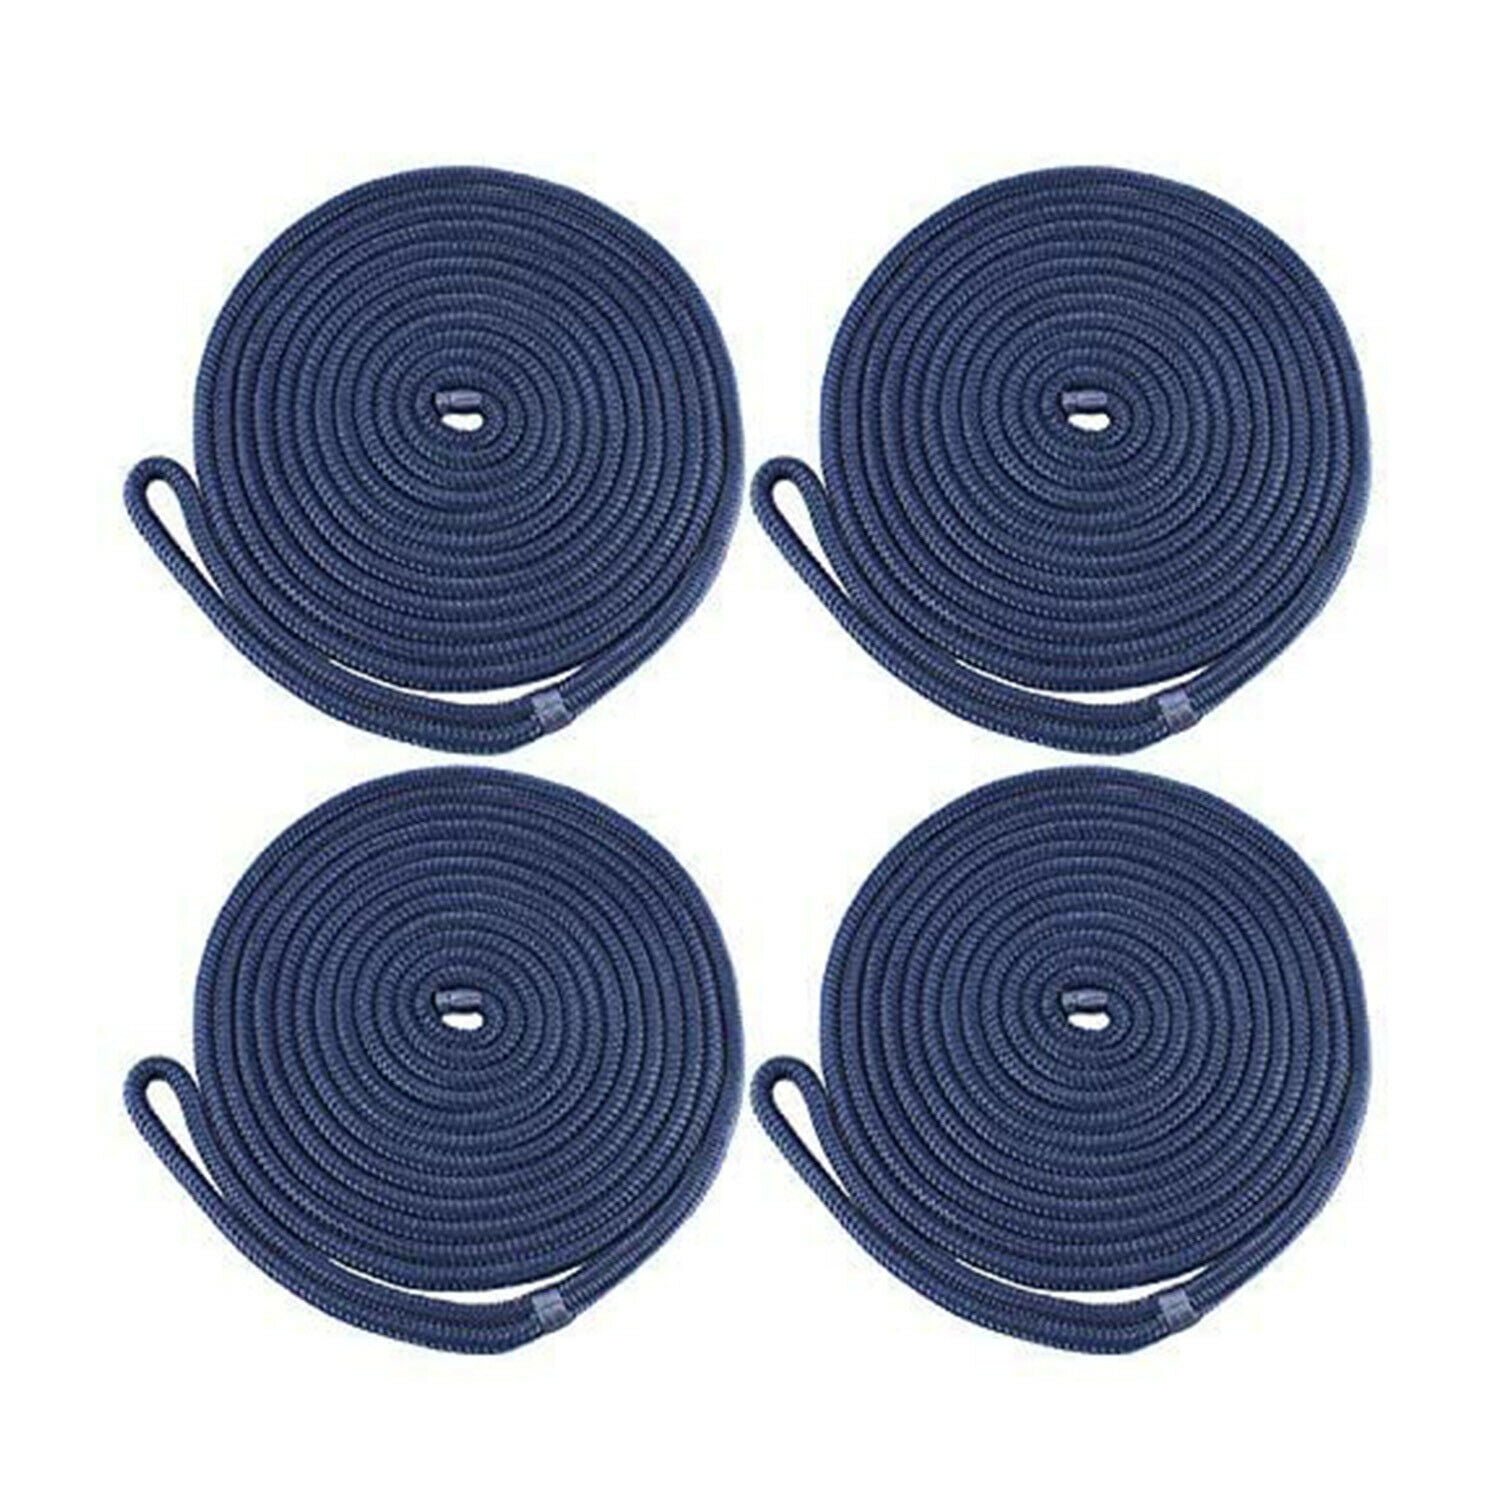 4 Pack of 3/4 Inch x 35 Ft Premium Twisted Nylon Mooring and Docking Lines